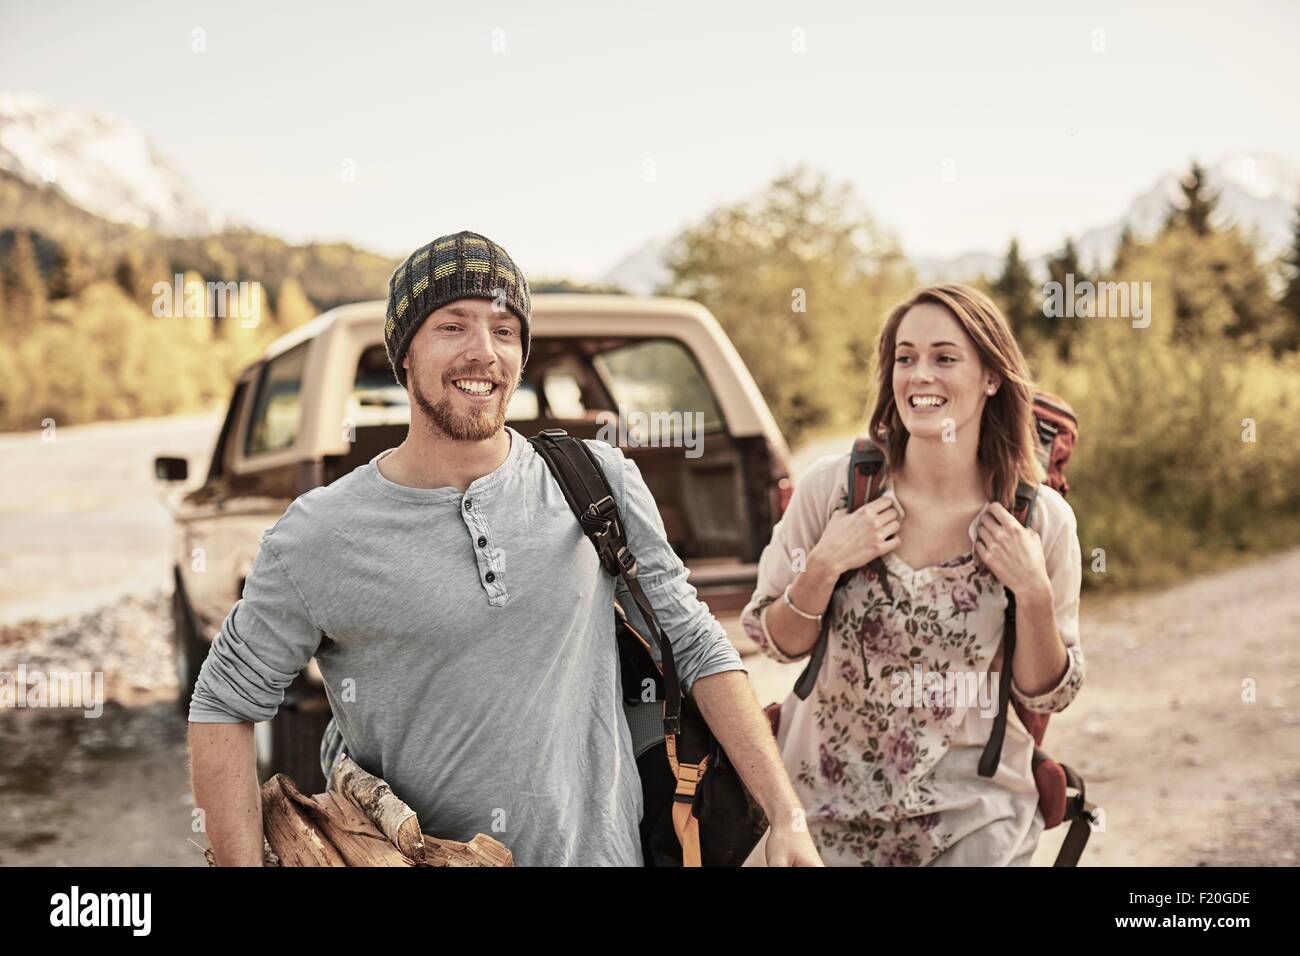 Young couple preparing to go hiking, carrying firewood, smiling Stock Photo